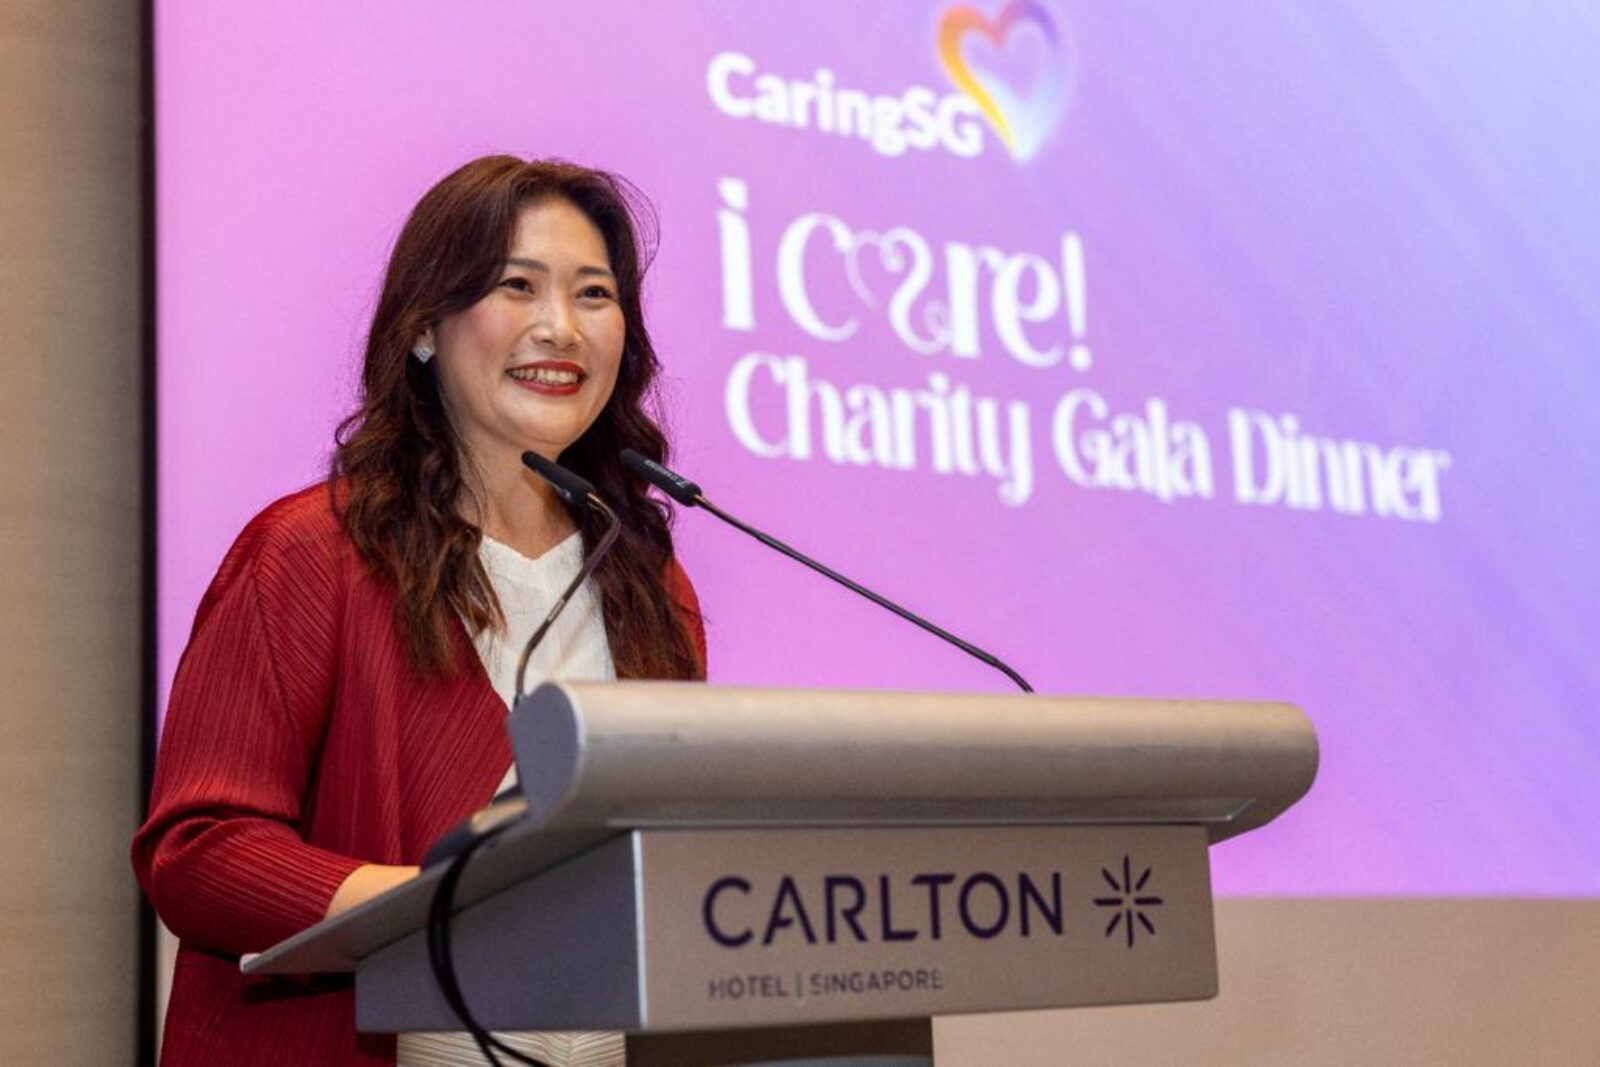 i care! Gala Dinner: Dr Lim Hong Huay’s Speech on 25 March 2023